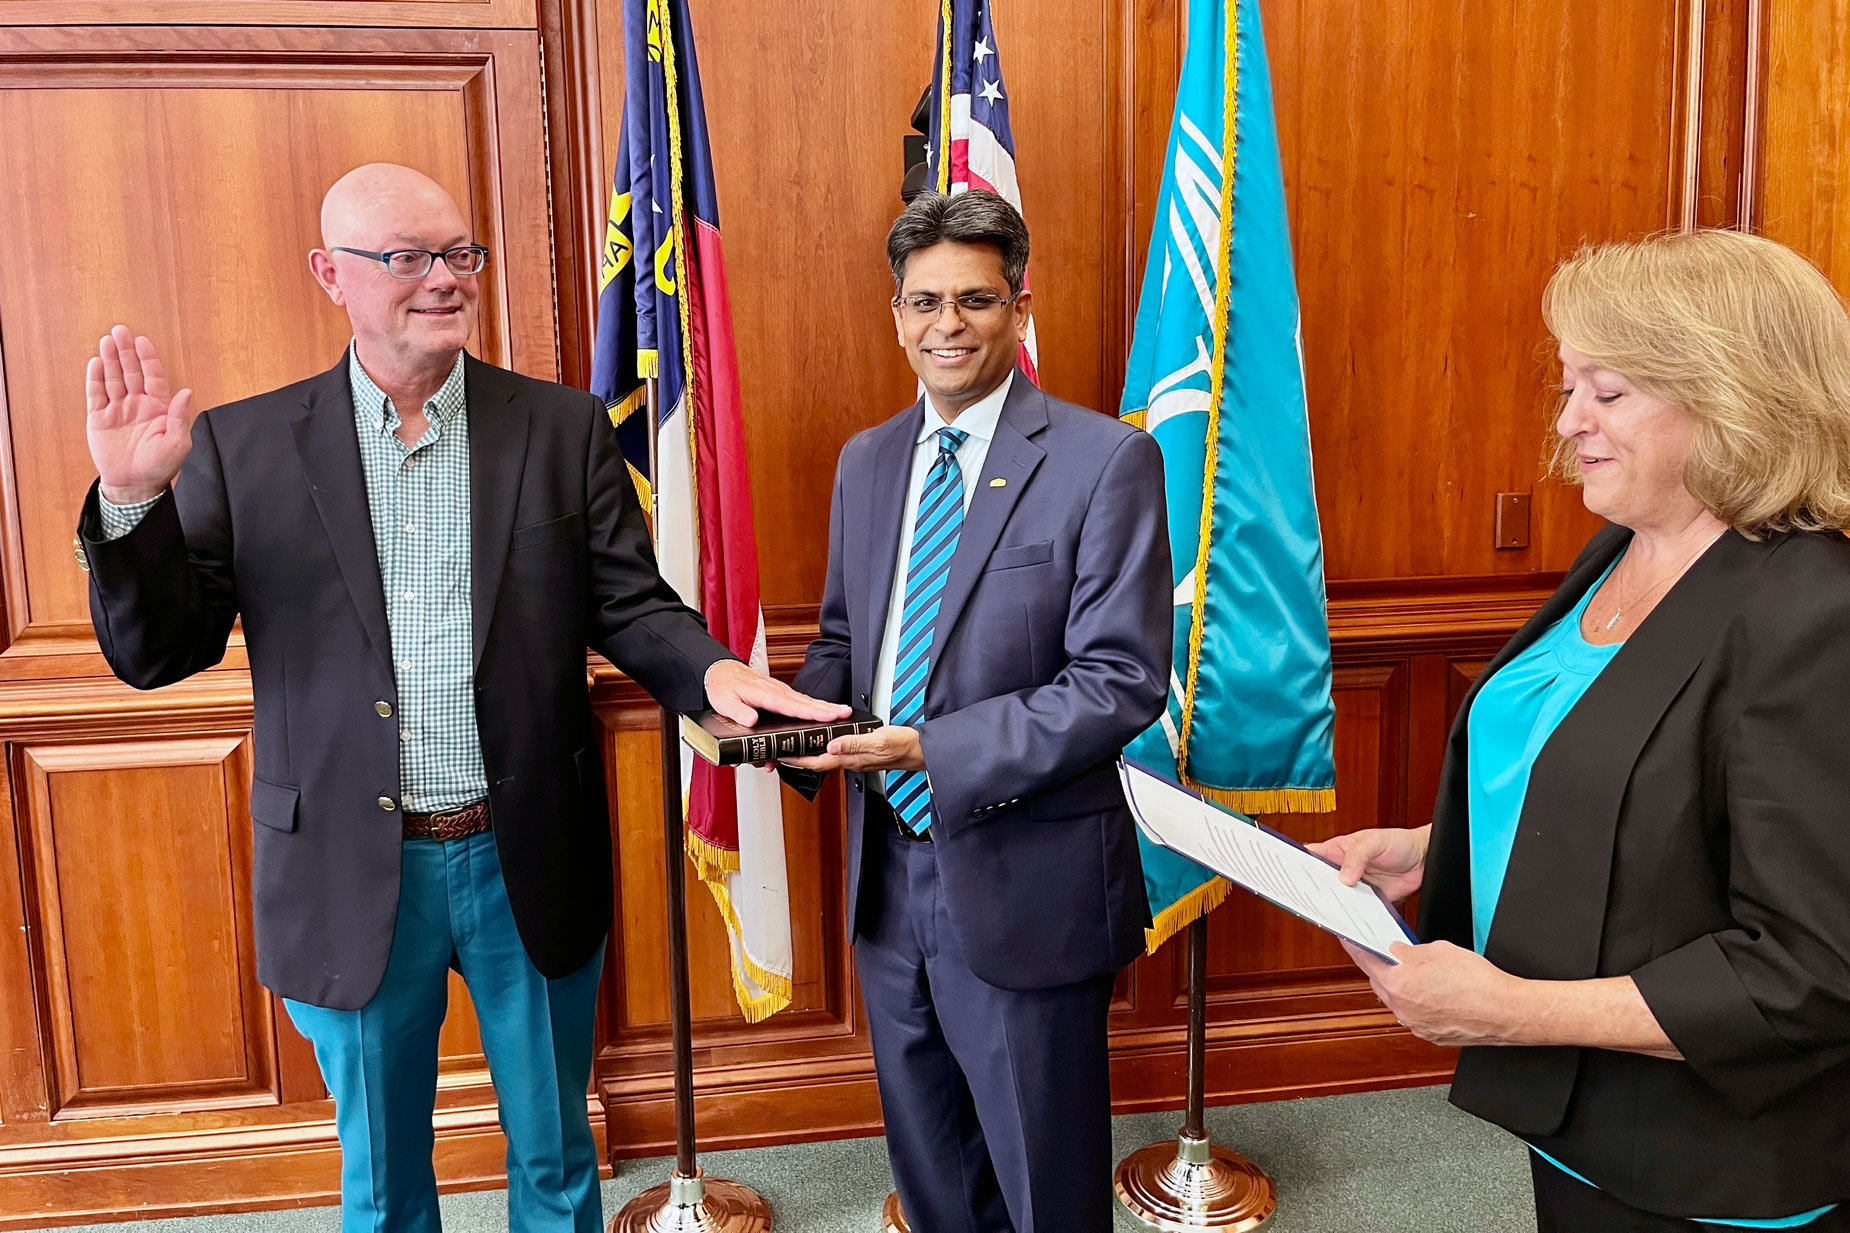 Steve Griffin ’82 recently took the oath of office as a new member of the UNCW Board of Trustees.